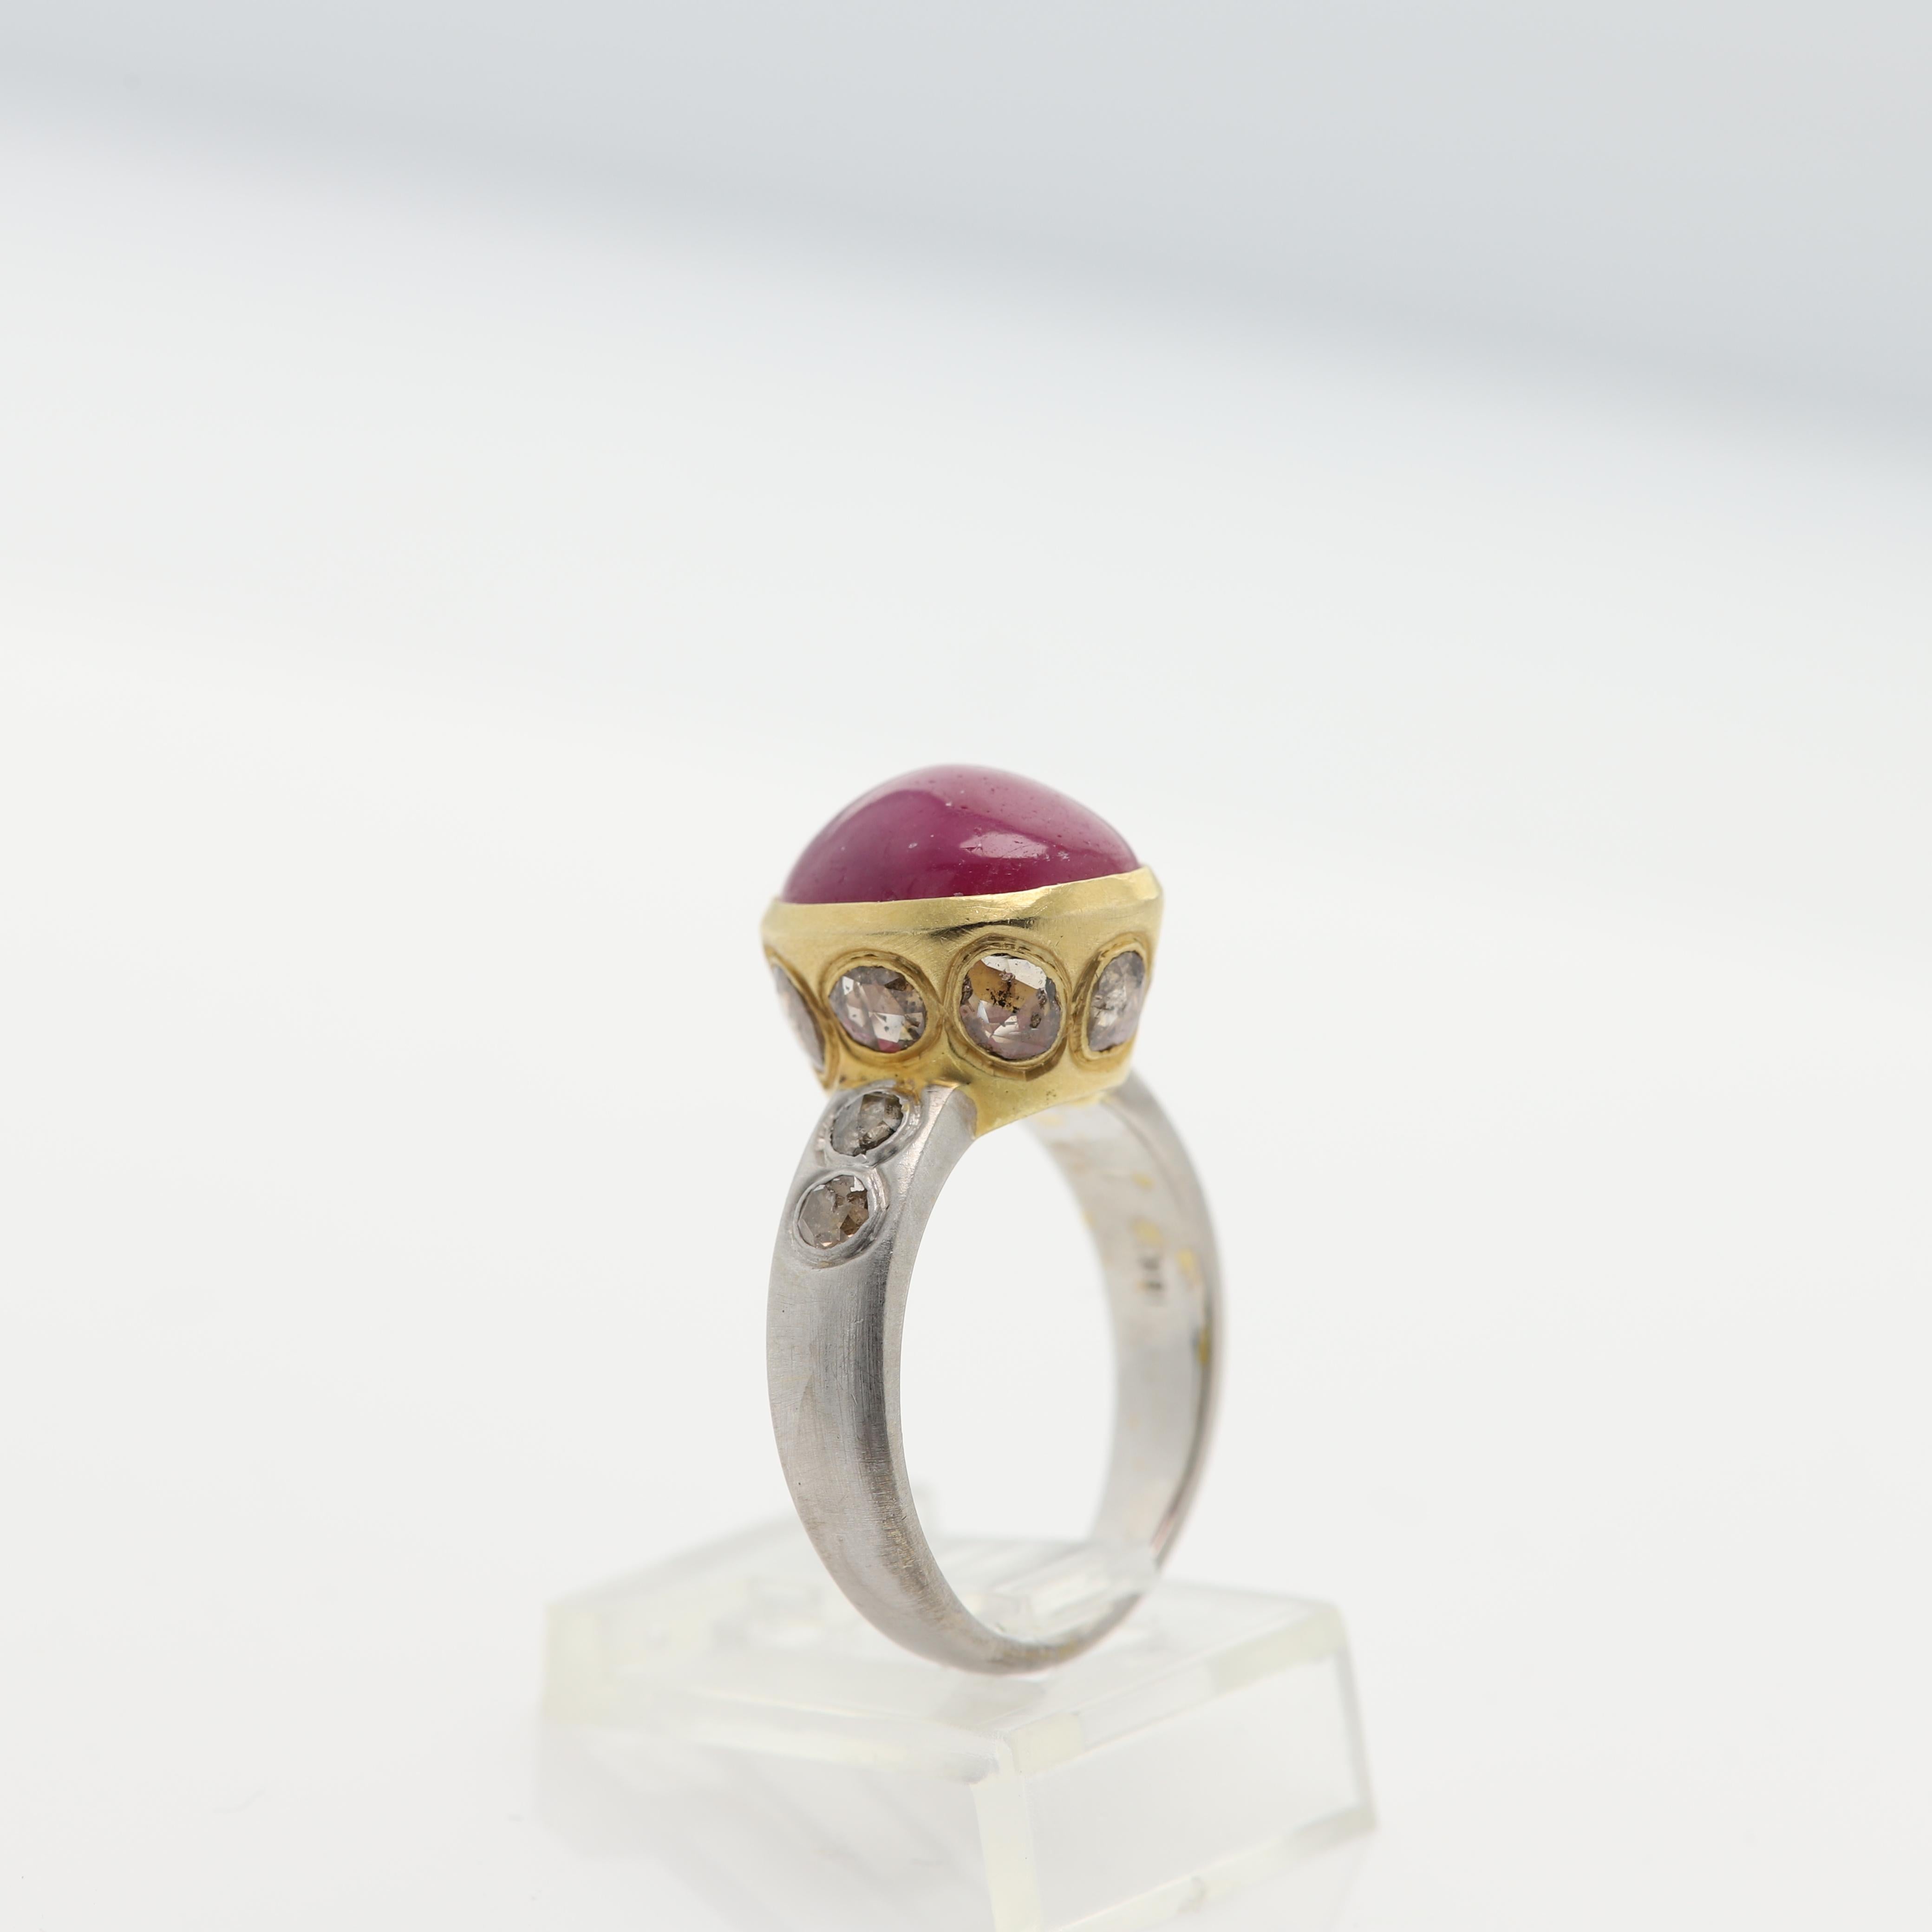 Vintage Ruby & Diamonds - Hand Made in Italy
18k Two Tone Yellow & White Gold 8.40 grams - mat finish (not shiney gold)
Ruby Cabochon 5.60 Carat Oval shape and Dome  approx size 12 x 10 mm Dark Red Tone & Bezel set.
Old Cut Light Brown Diamonds on